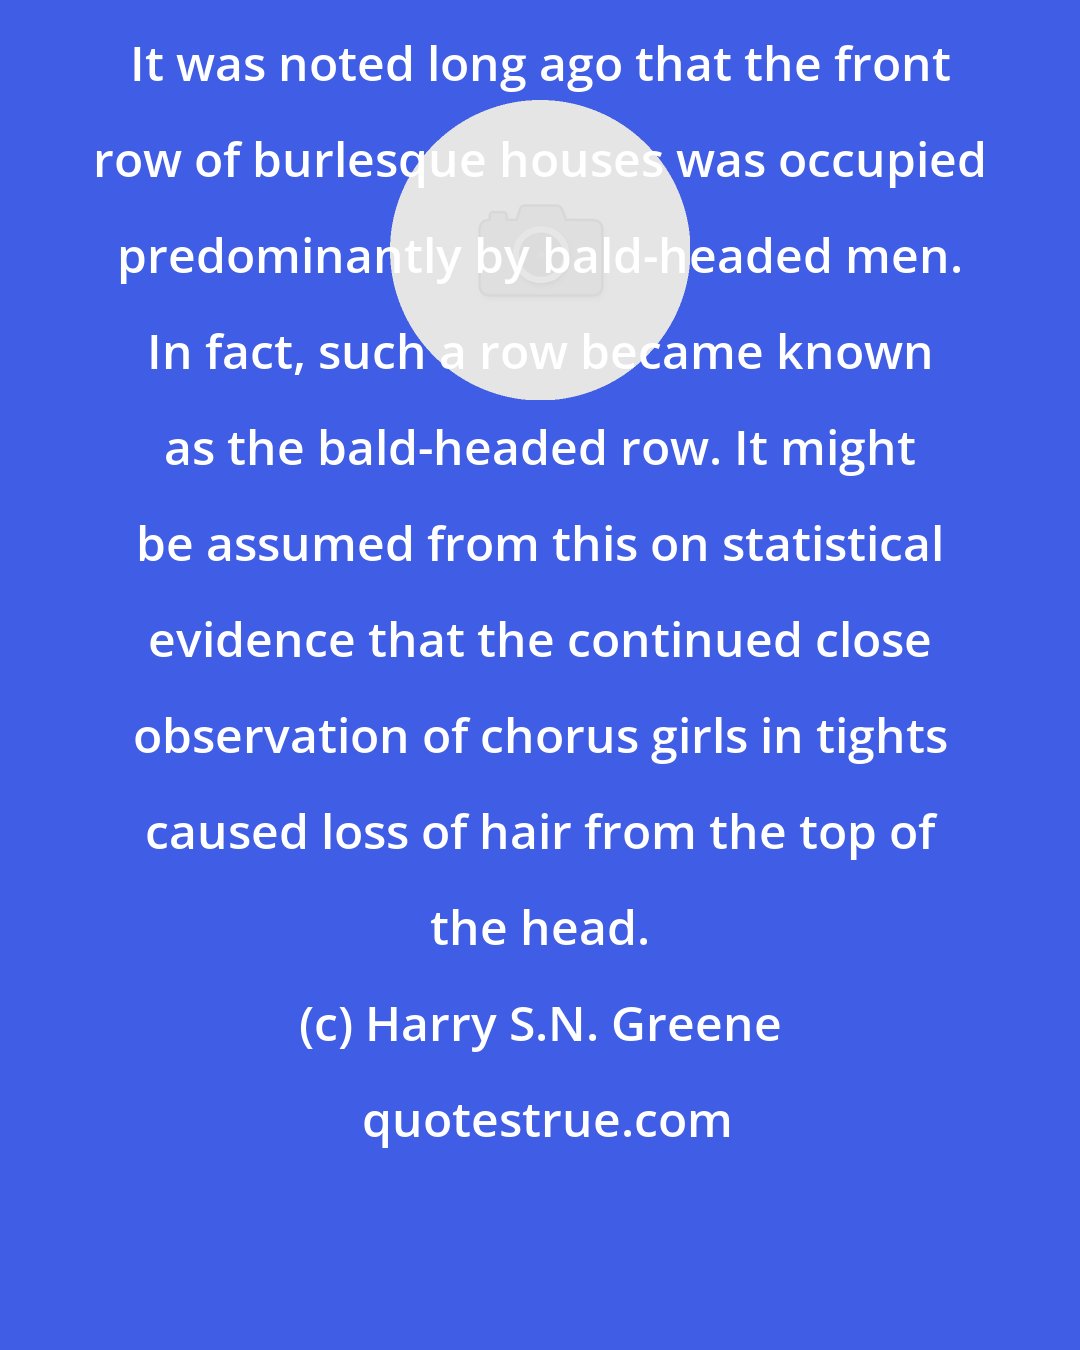 Harry S.N. Greene: It was noted long ago that the front row of burlesque houses was occupied predominantly by bald-headed men. In fact, such a row became known as the bald-headed row. It might be assumed from this on statistical evidence that the continued close observation of chorus girls in tights caused loss of hair from the top of the head.